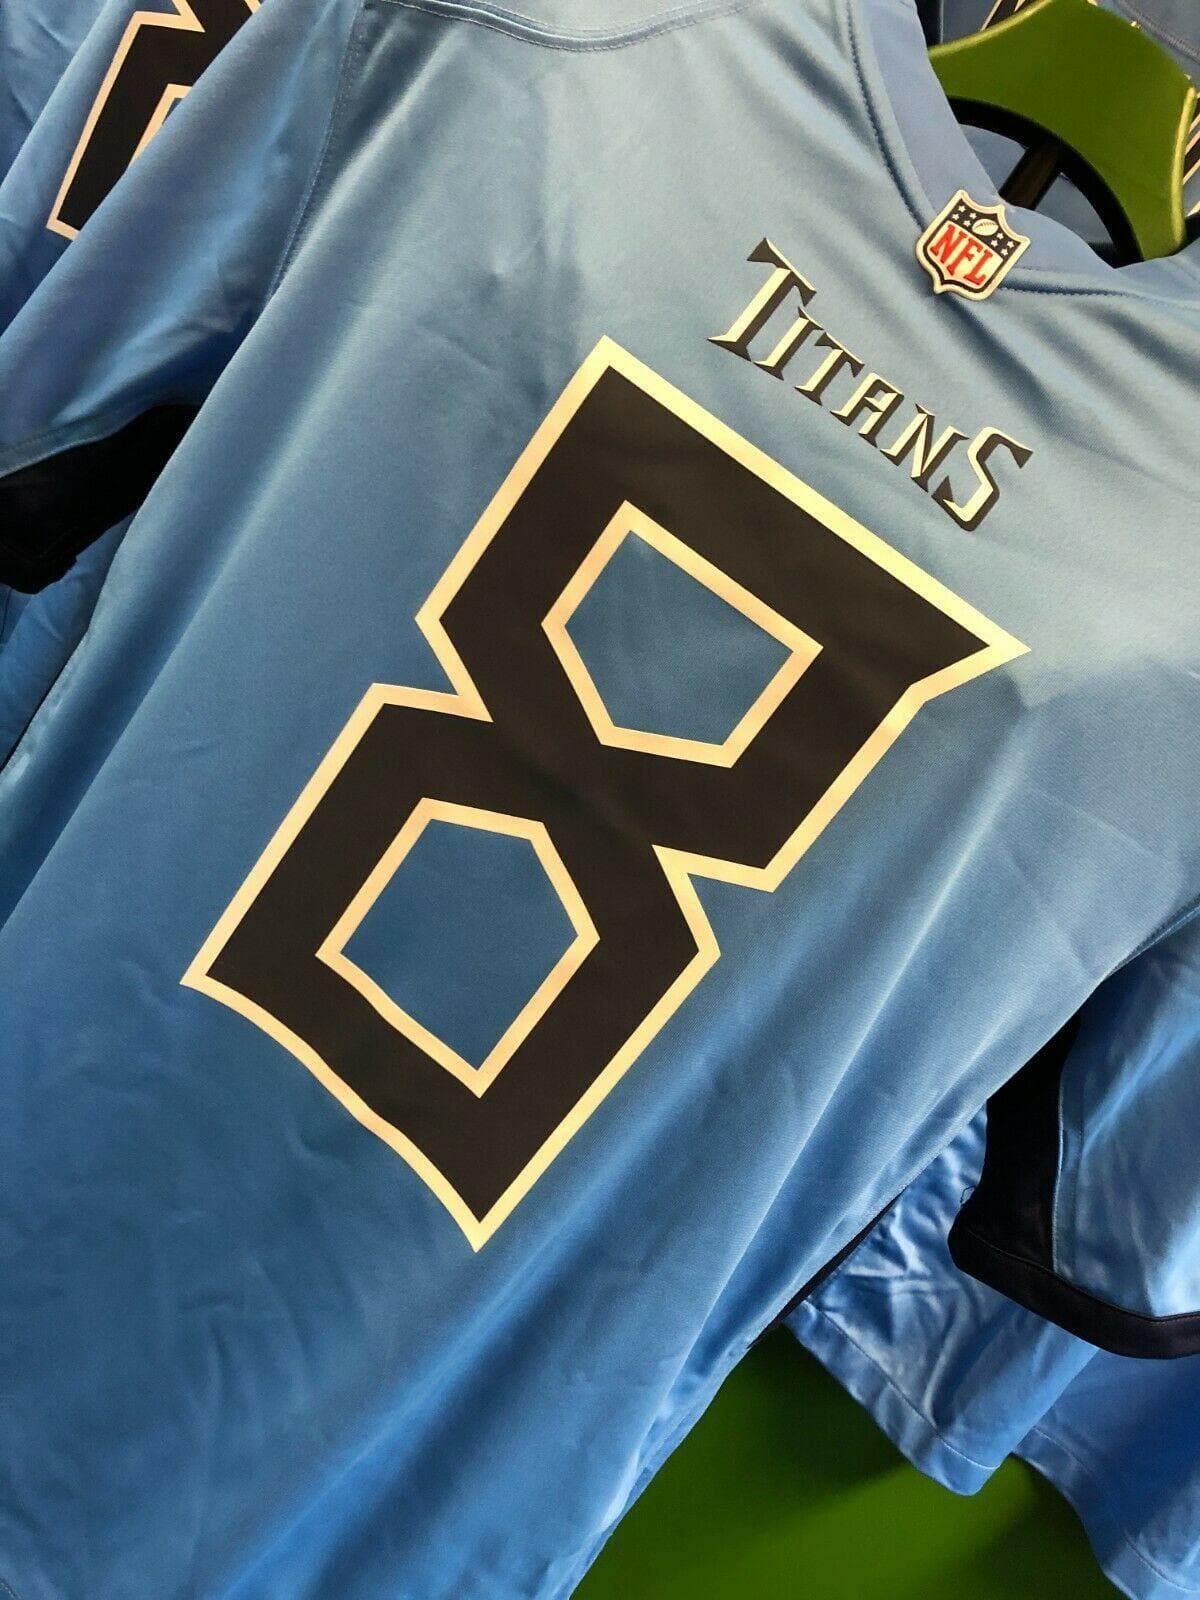 NFL Tennessee Titans Mariota #8 Game Jersey Men's 2X-Large NWT